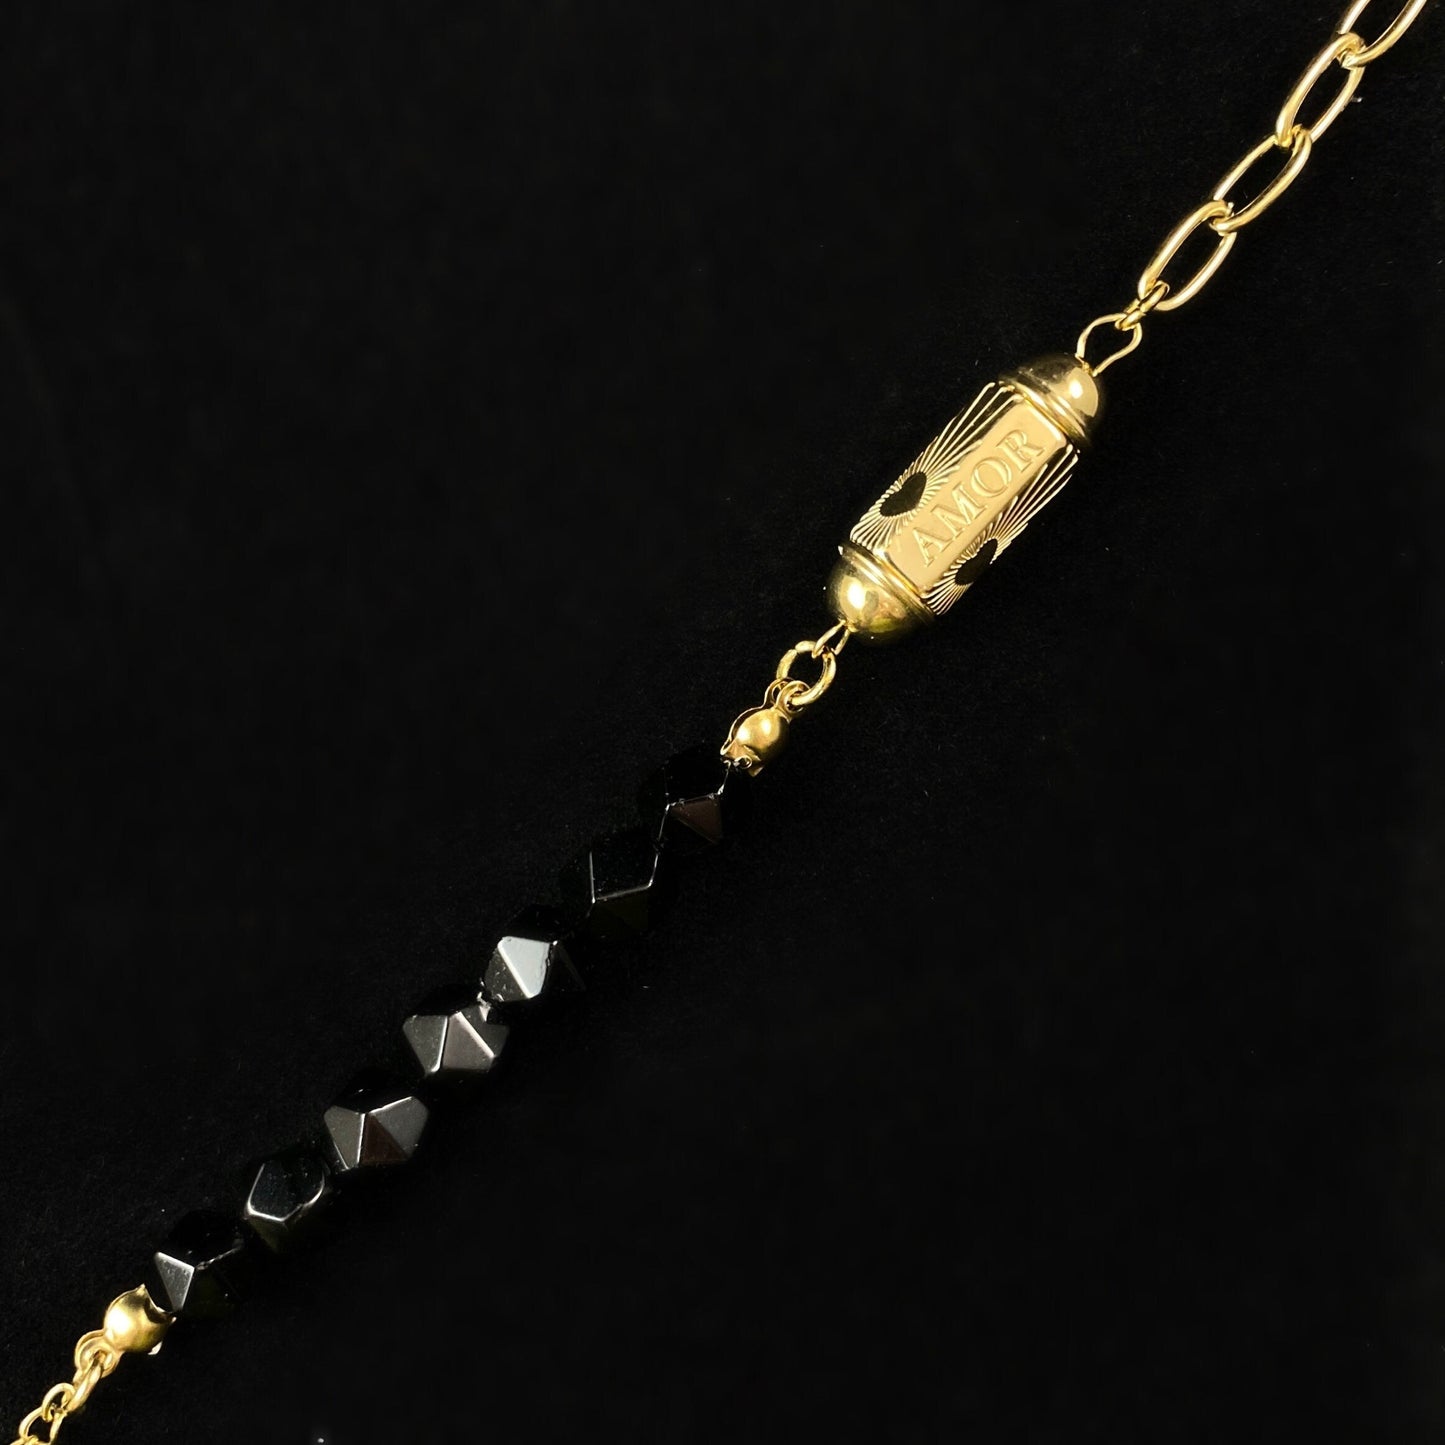 Black Natural Stone Bracelet with Love/Amor Calligraphy and Dainty Gold Heart Detailing